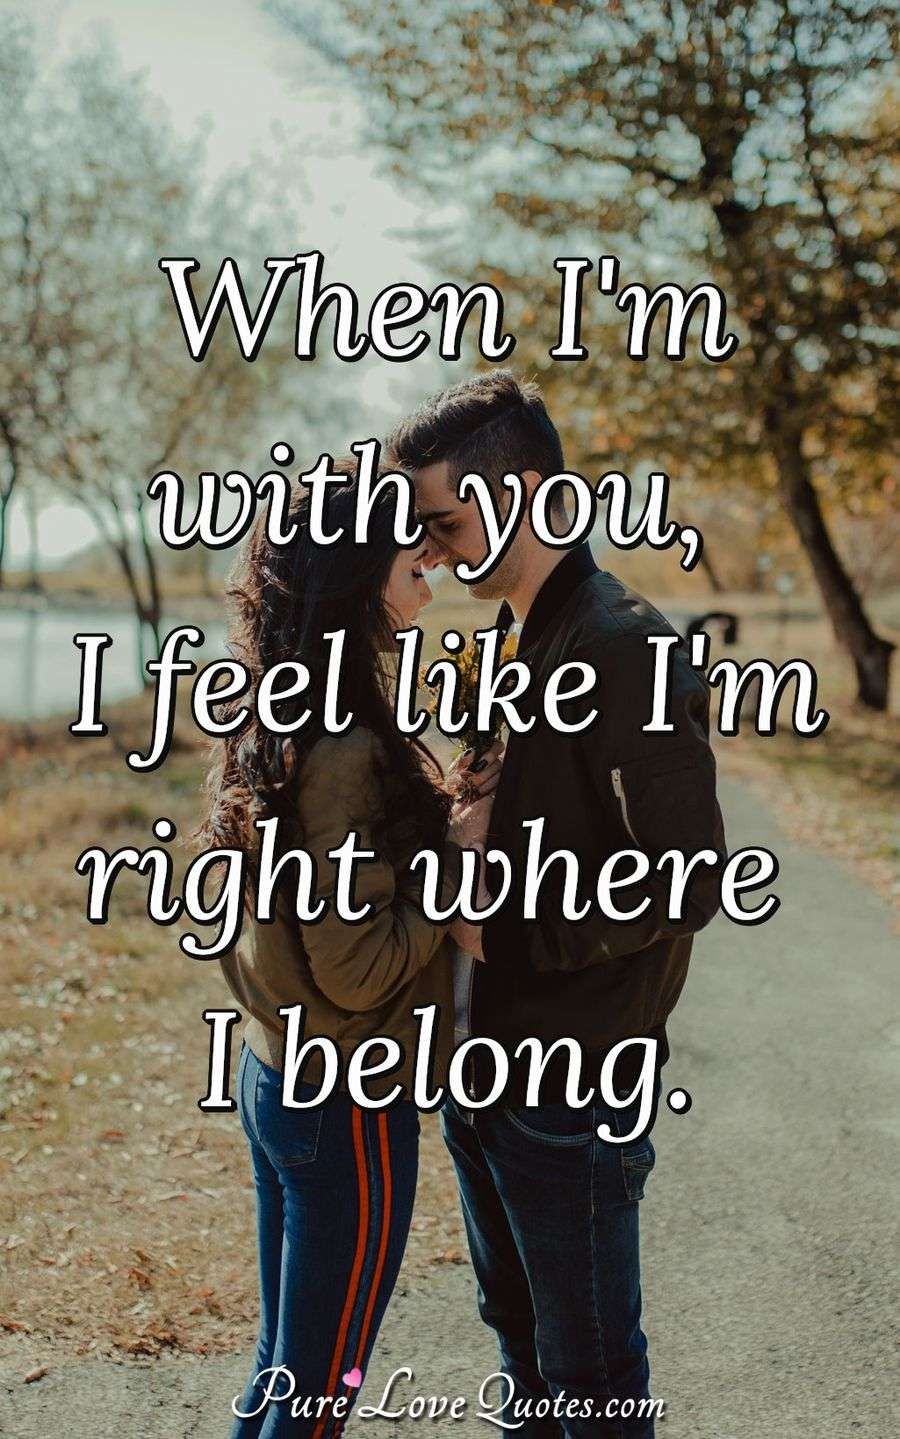 When I'm with you, I feel like I'm right where I belong. - Anonymous